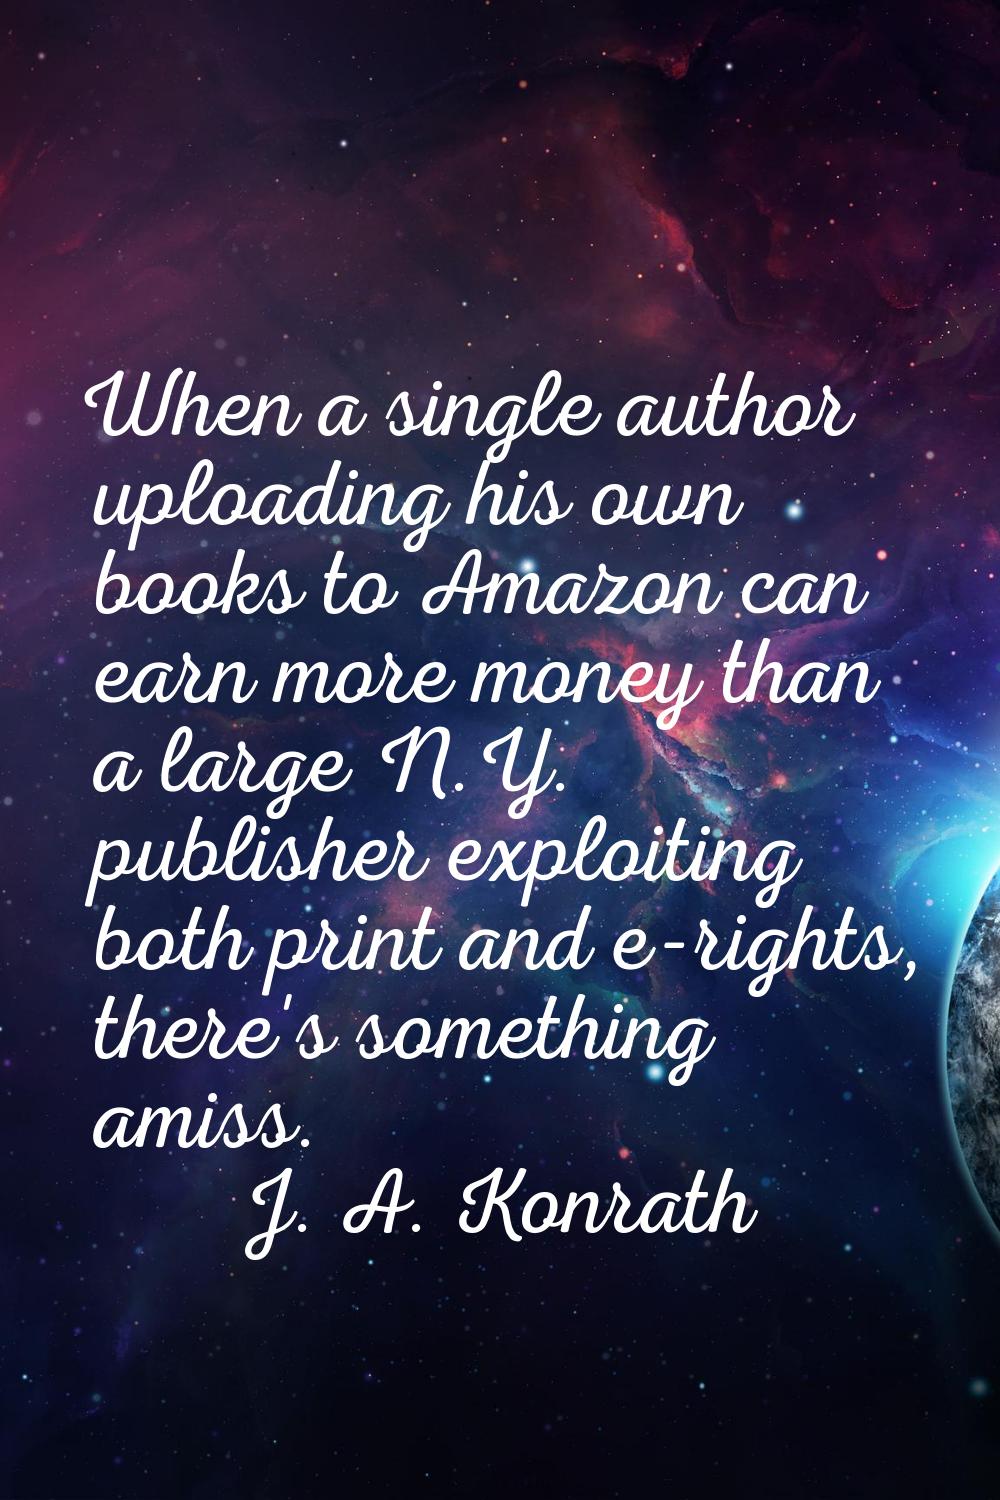 When a single author uploading his own books to Amazon can earn more money than a large N.Y. publis